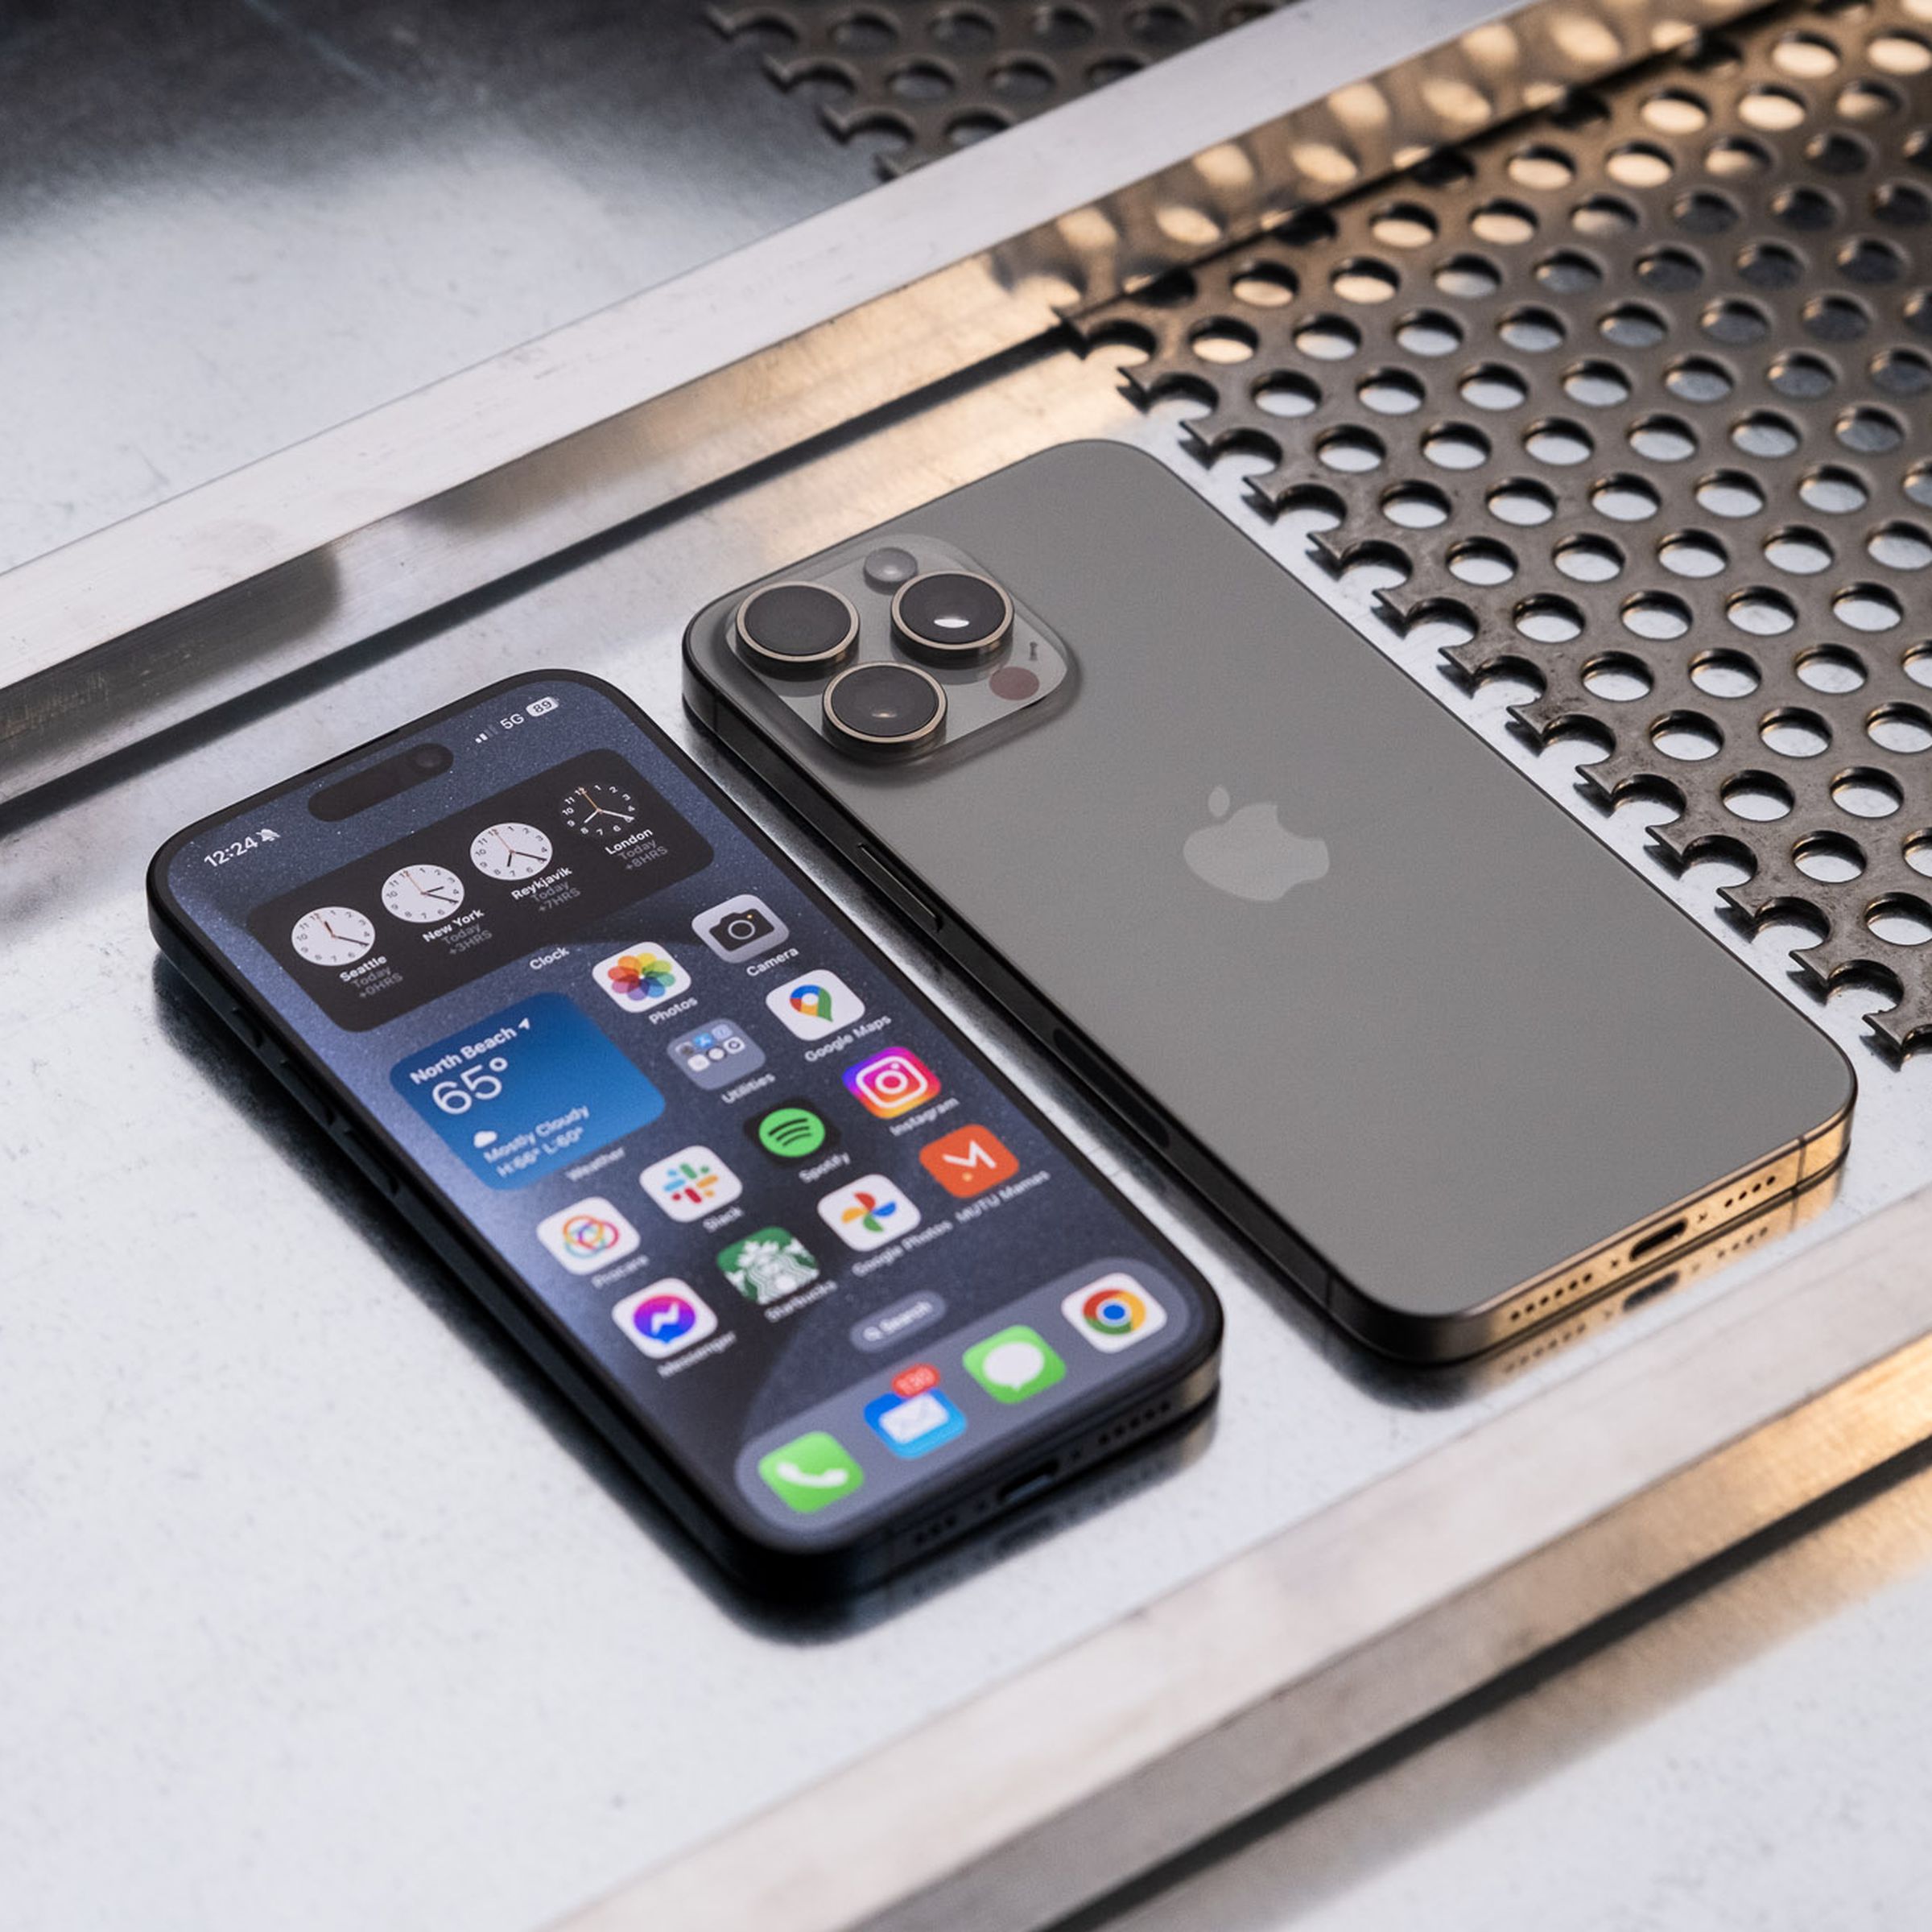 An iPhone 15 Pro and Pro Max side-by-side on a metal surface.